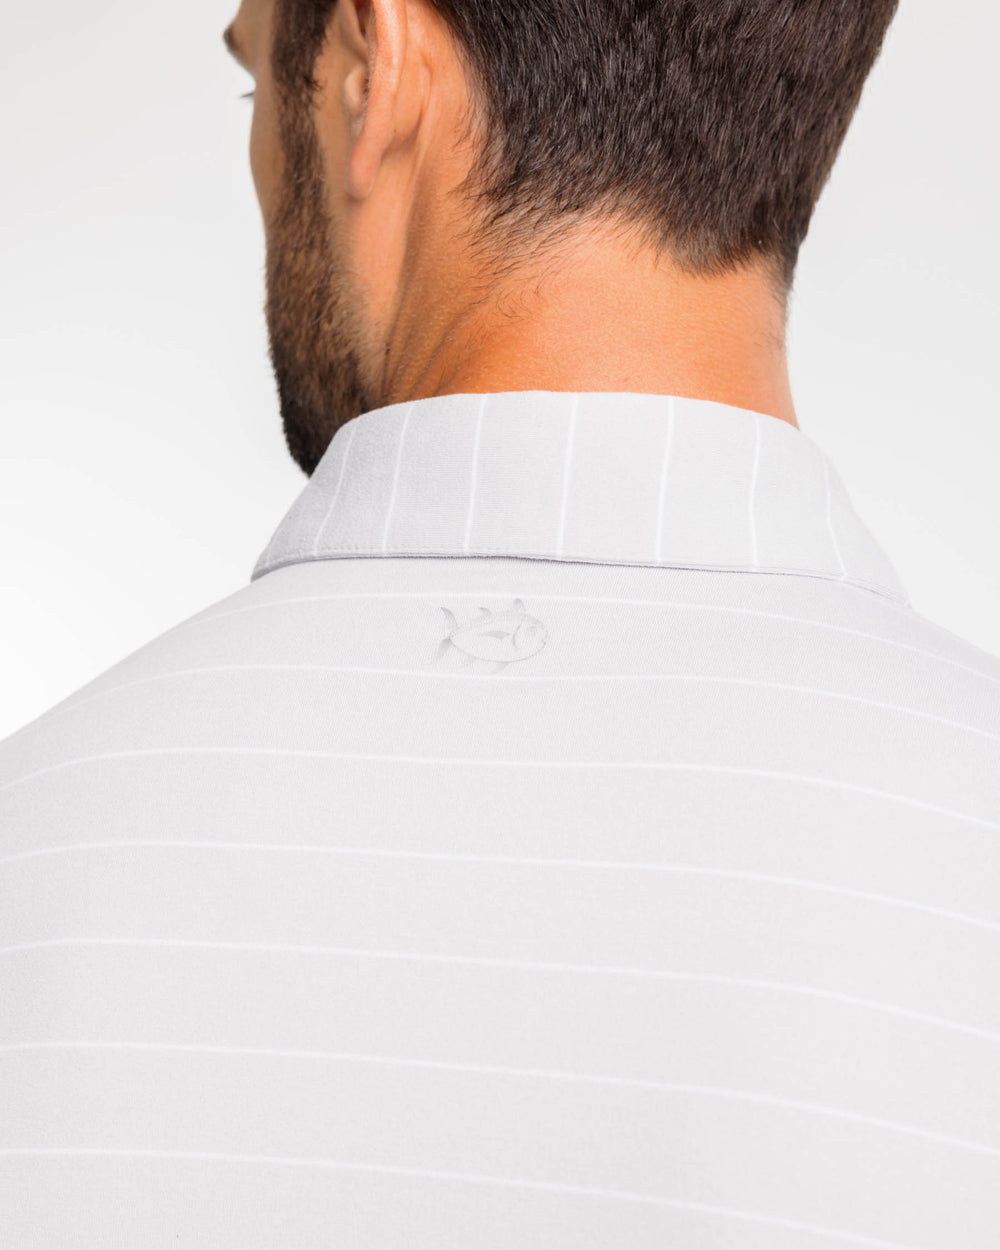 The back view of the Ryder Bartlett Stripe Performance Polo Shirt by Southern Tide - Heather Seagull Grey